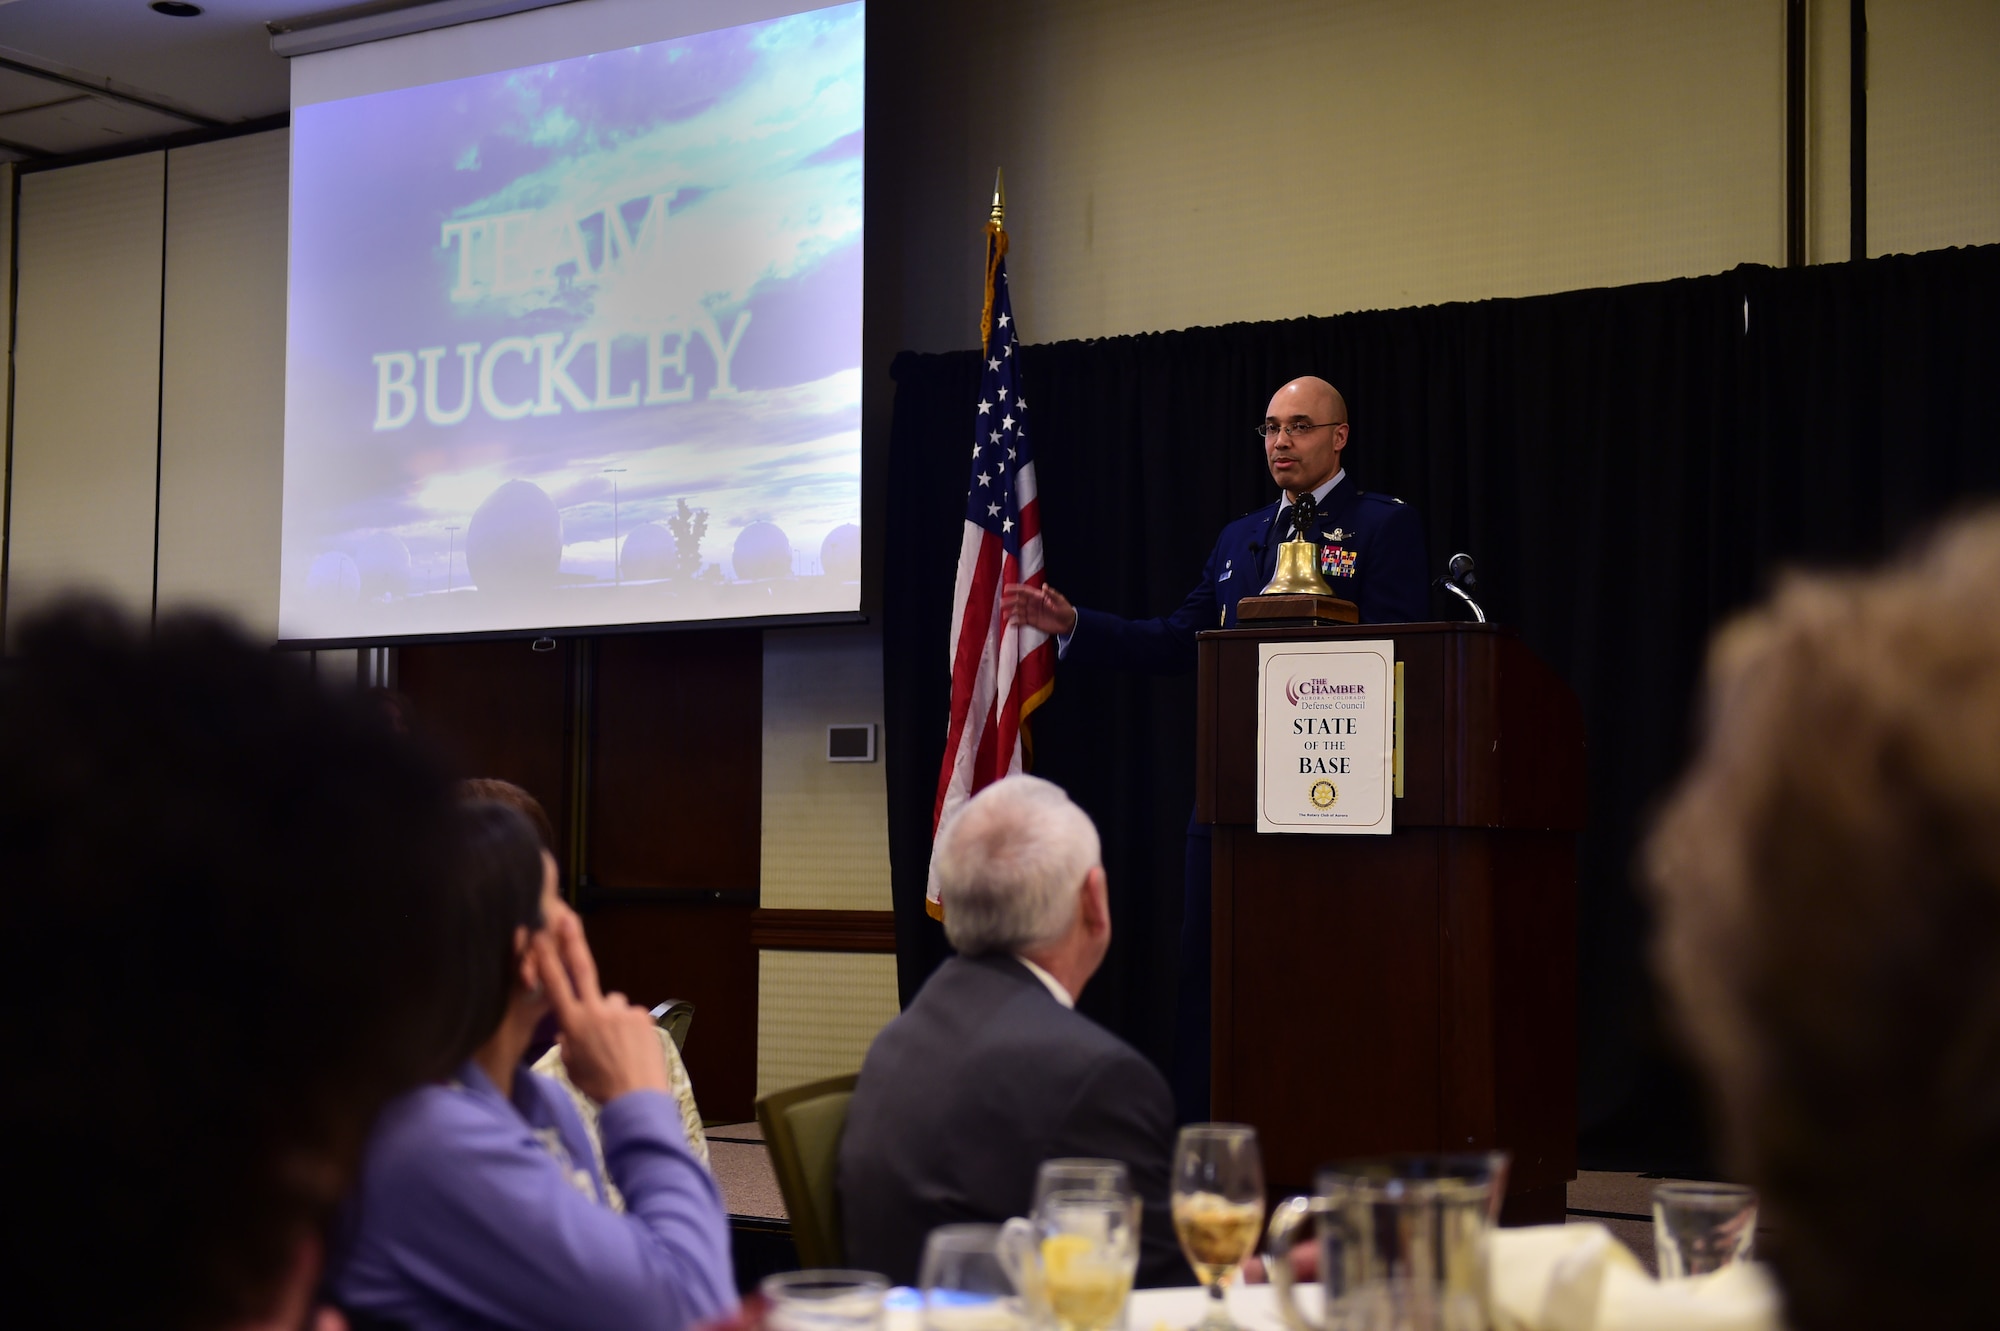 Col. David Miller Jr., 460th Space Wing commander on Buckley Air Force Base, Colo., addresses community leaders at the annual State of the Base, Jan. 18, 2017, in Aurora. The State of the Base allows the installation commander to review the accomplishments of 2016, and give a preview of what is to come in 2017.